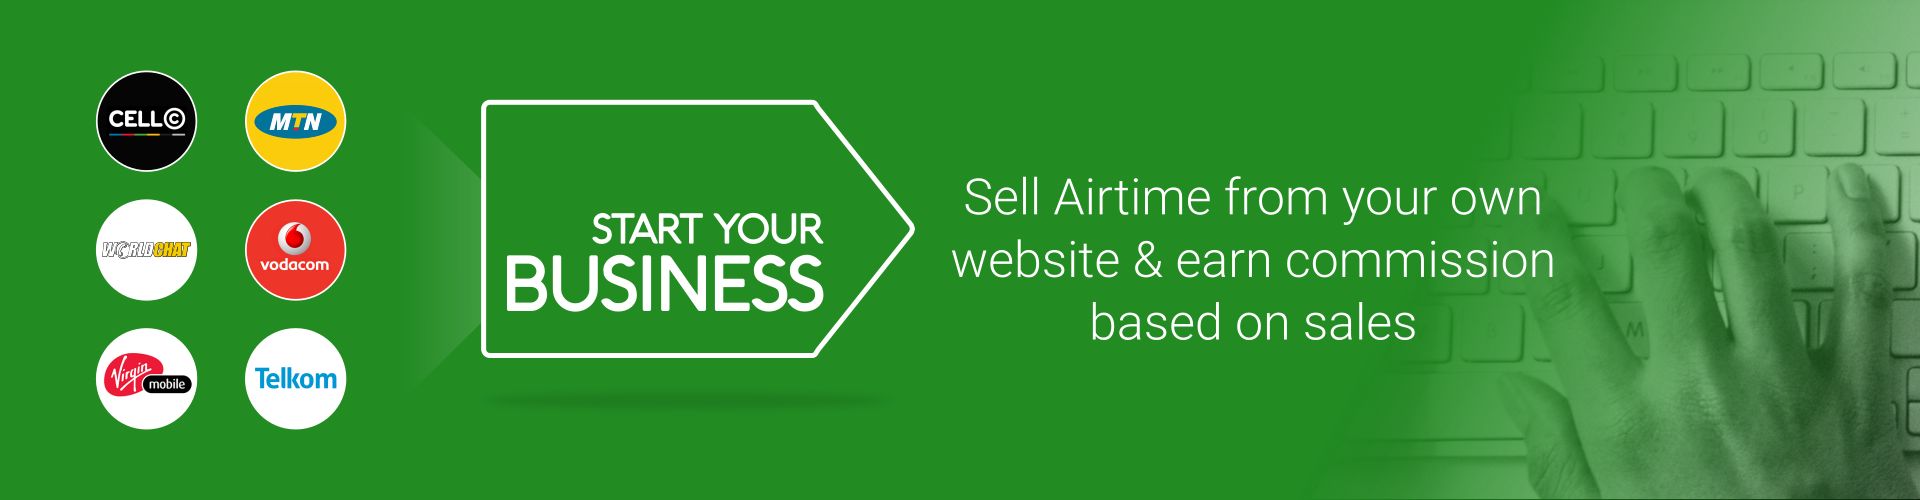 Start your own airtime business